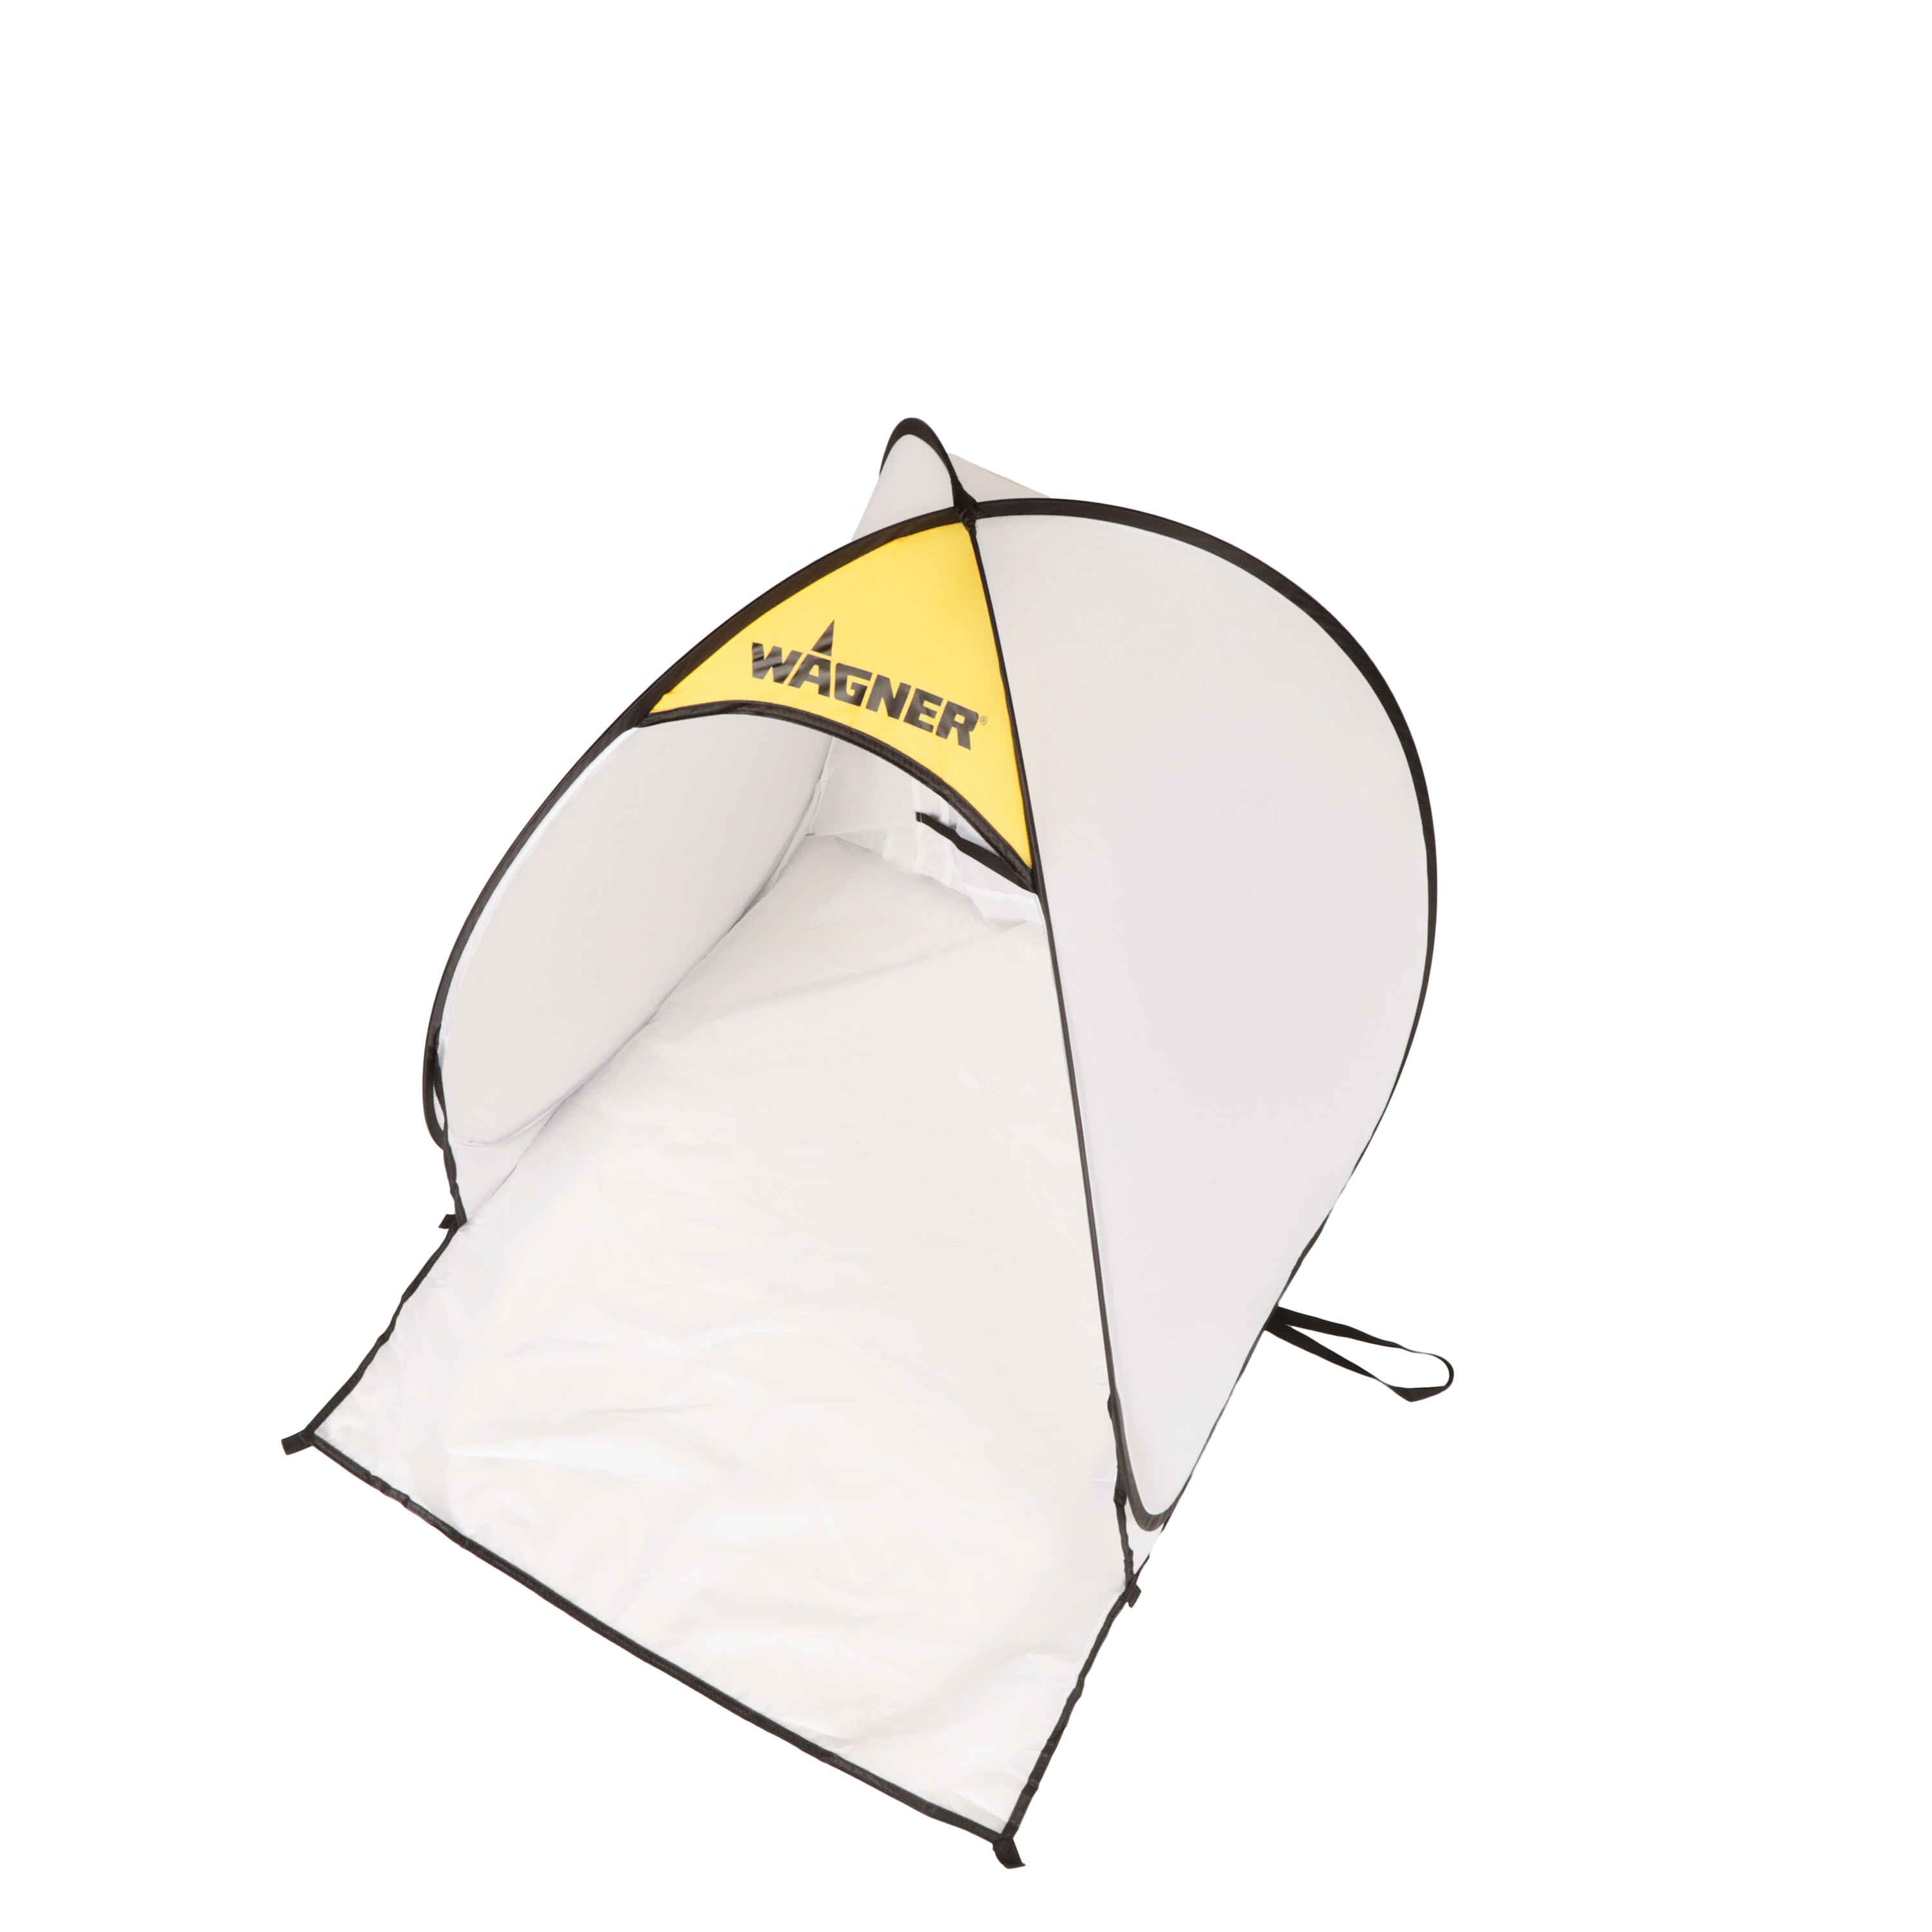 Wagner Small Spray Shelter: How to Fold  The Small Spray Shelter is a tent-like  structure that provides a safe area to spray paint or stain, and protects  your surrounding area from